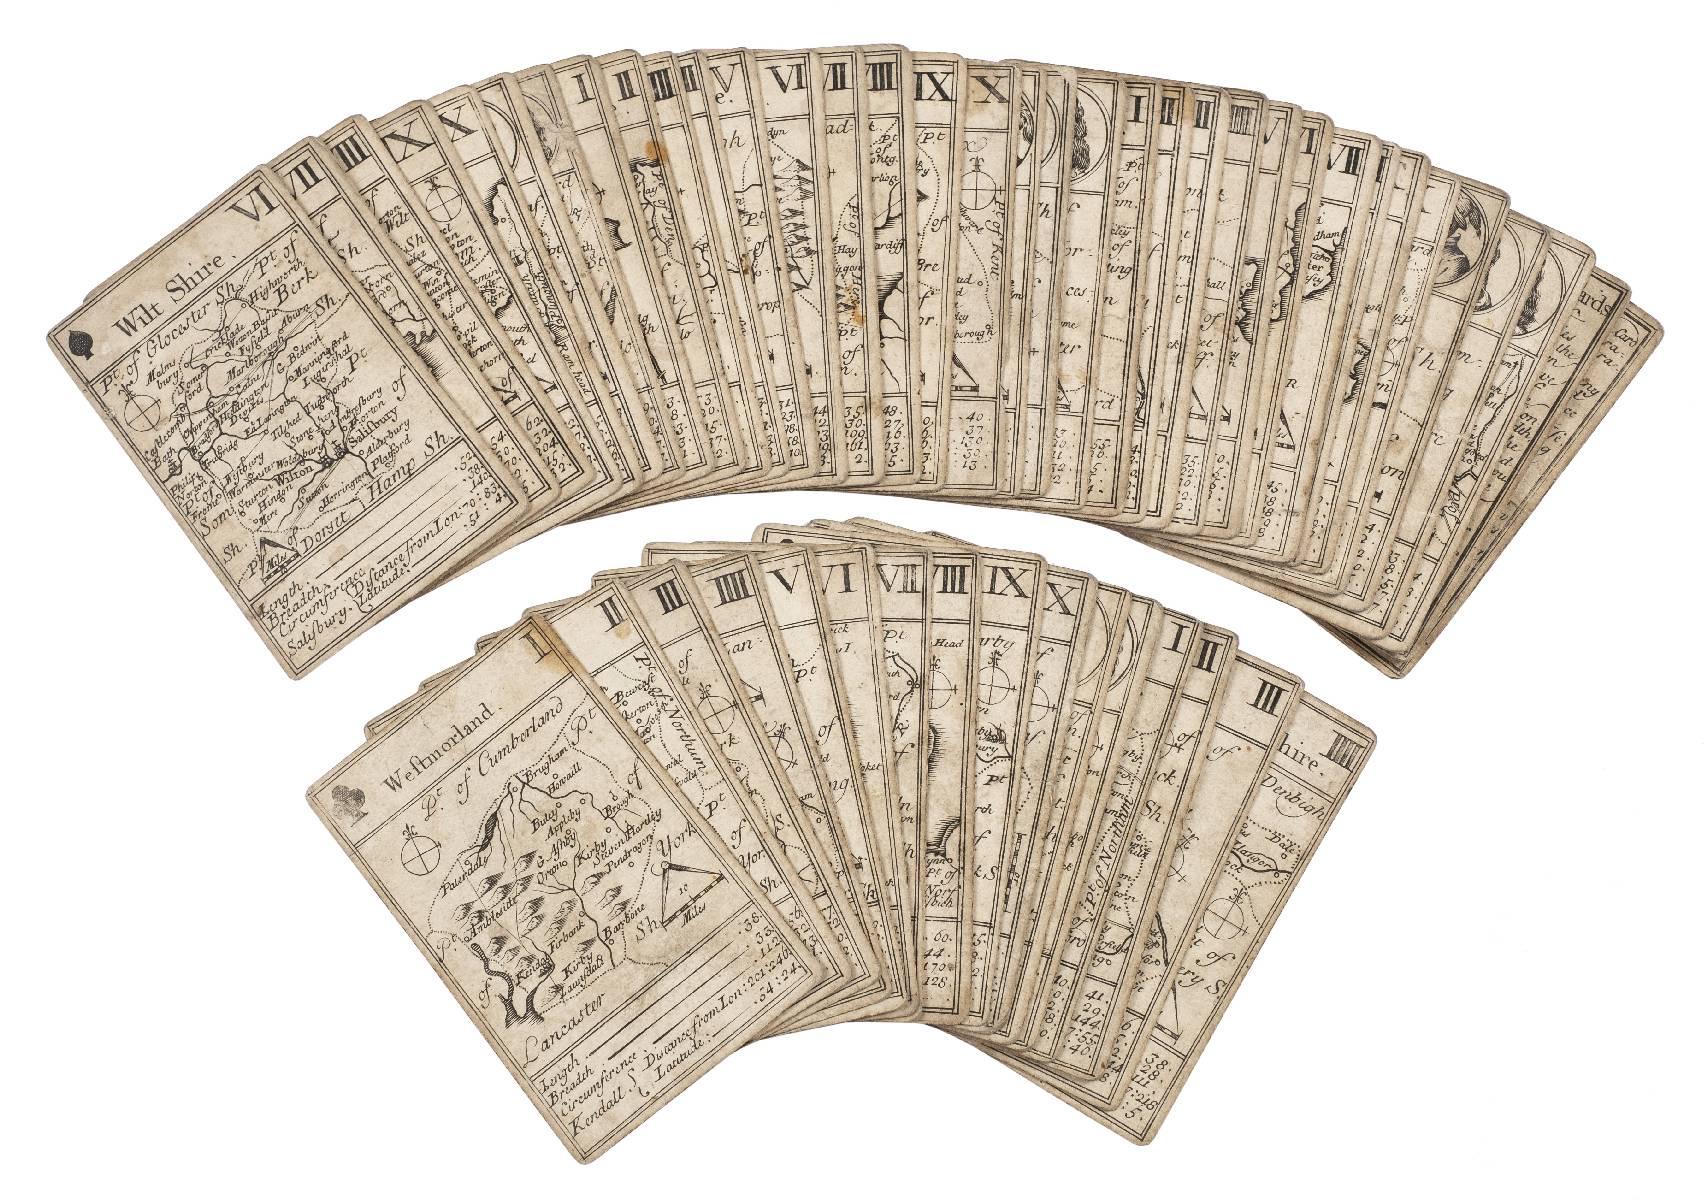 Lenthall (John). A set of 49 (of 52) playing card maps and two explanation cards, circa 1717,